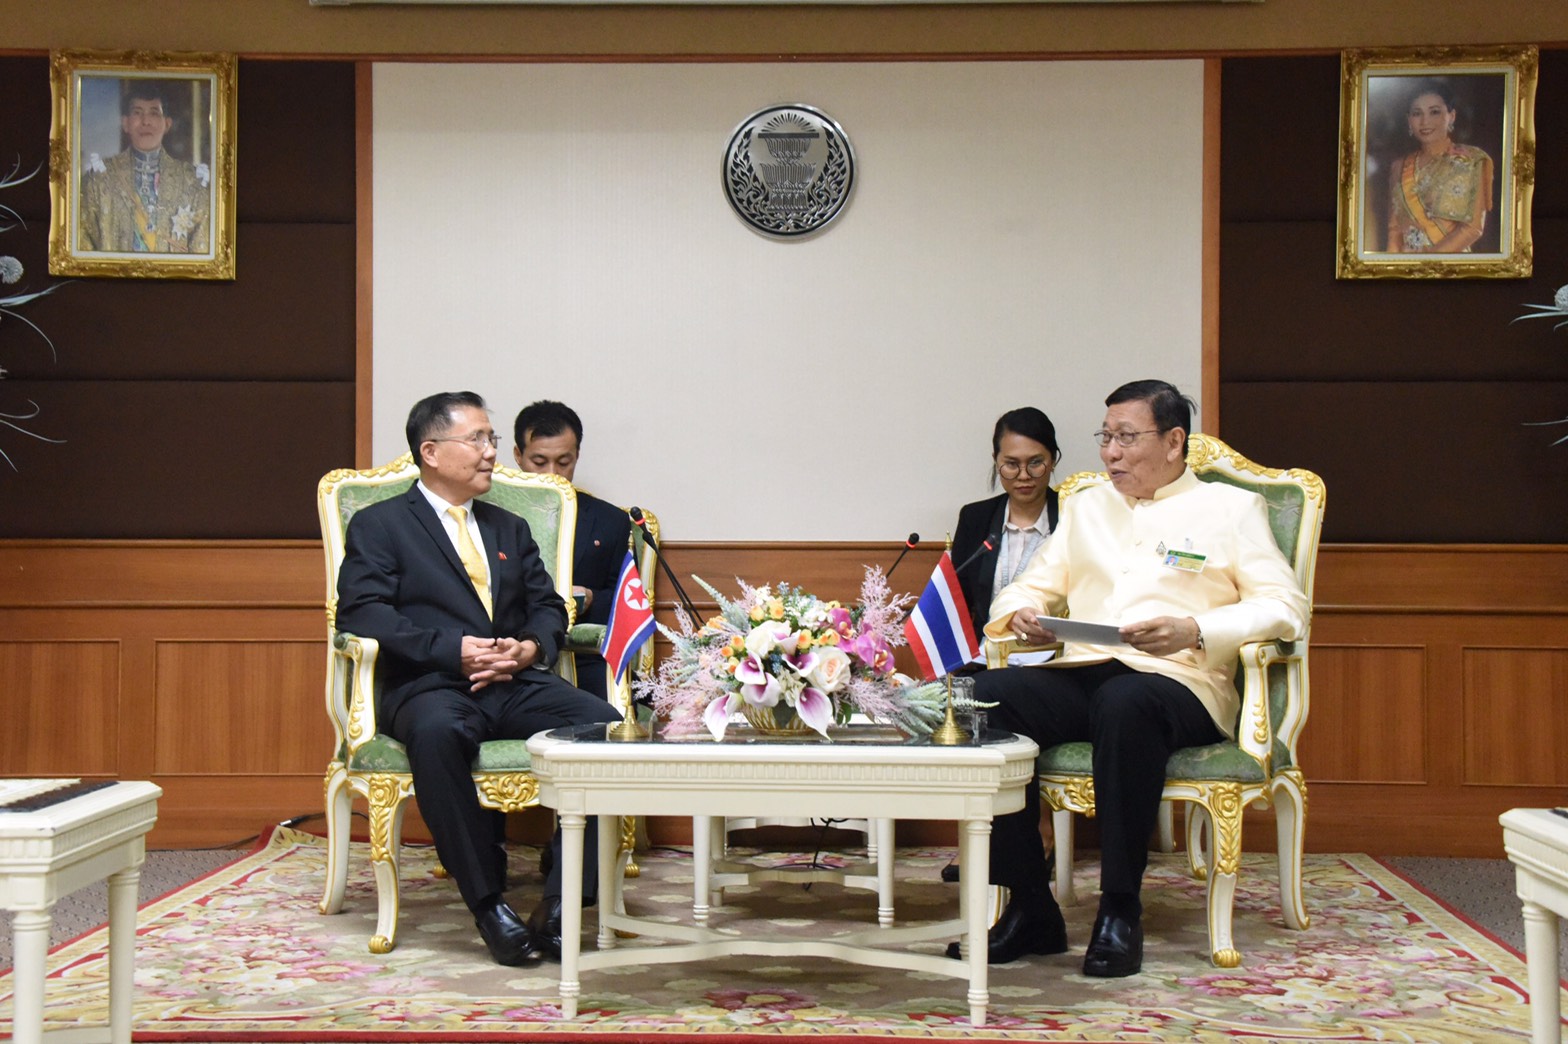 H.E. Mr. Kim Je Bong Ambassador of the Democratic People's Republic of Korea to Thailand Paid a Courtesy Call on the President of the Senate (18 December 2019)